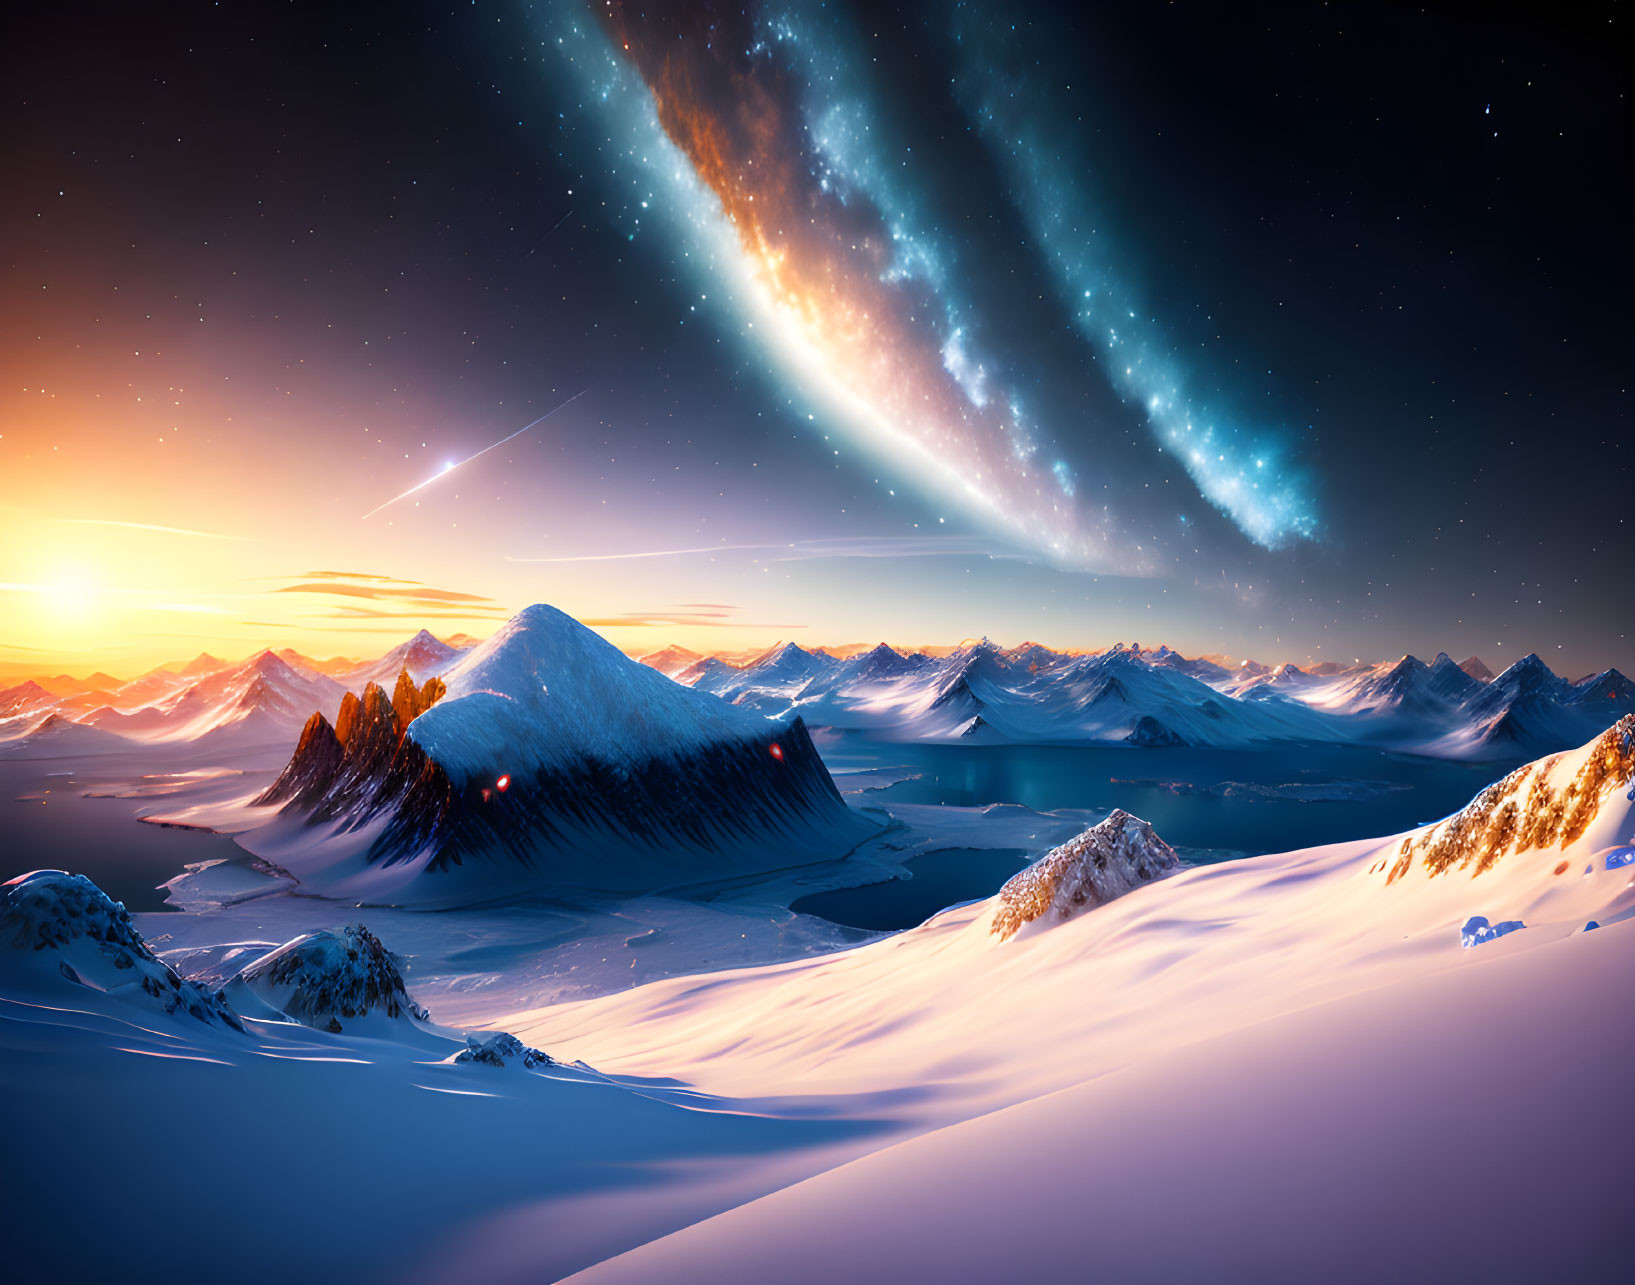 Snowy mountains under starry sky with meteor shower and sunrise horizon